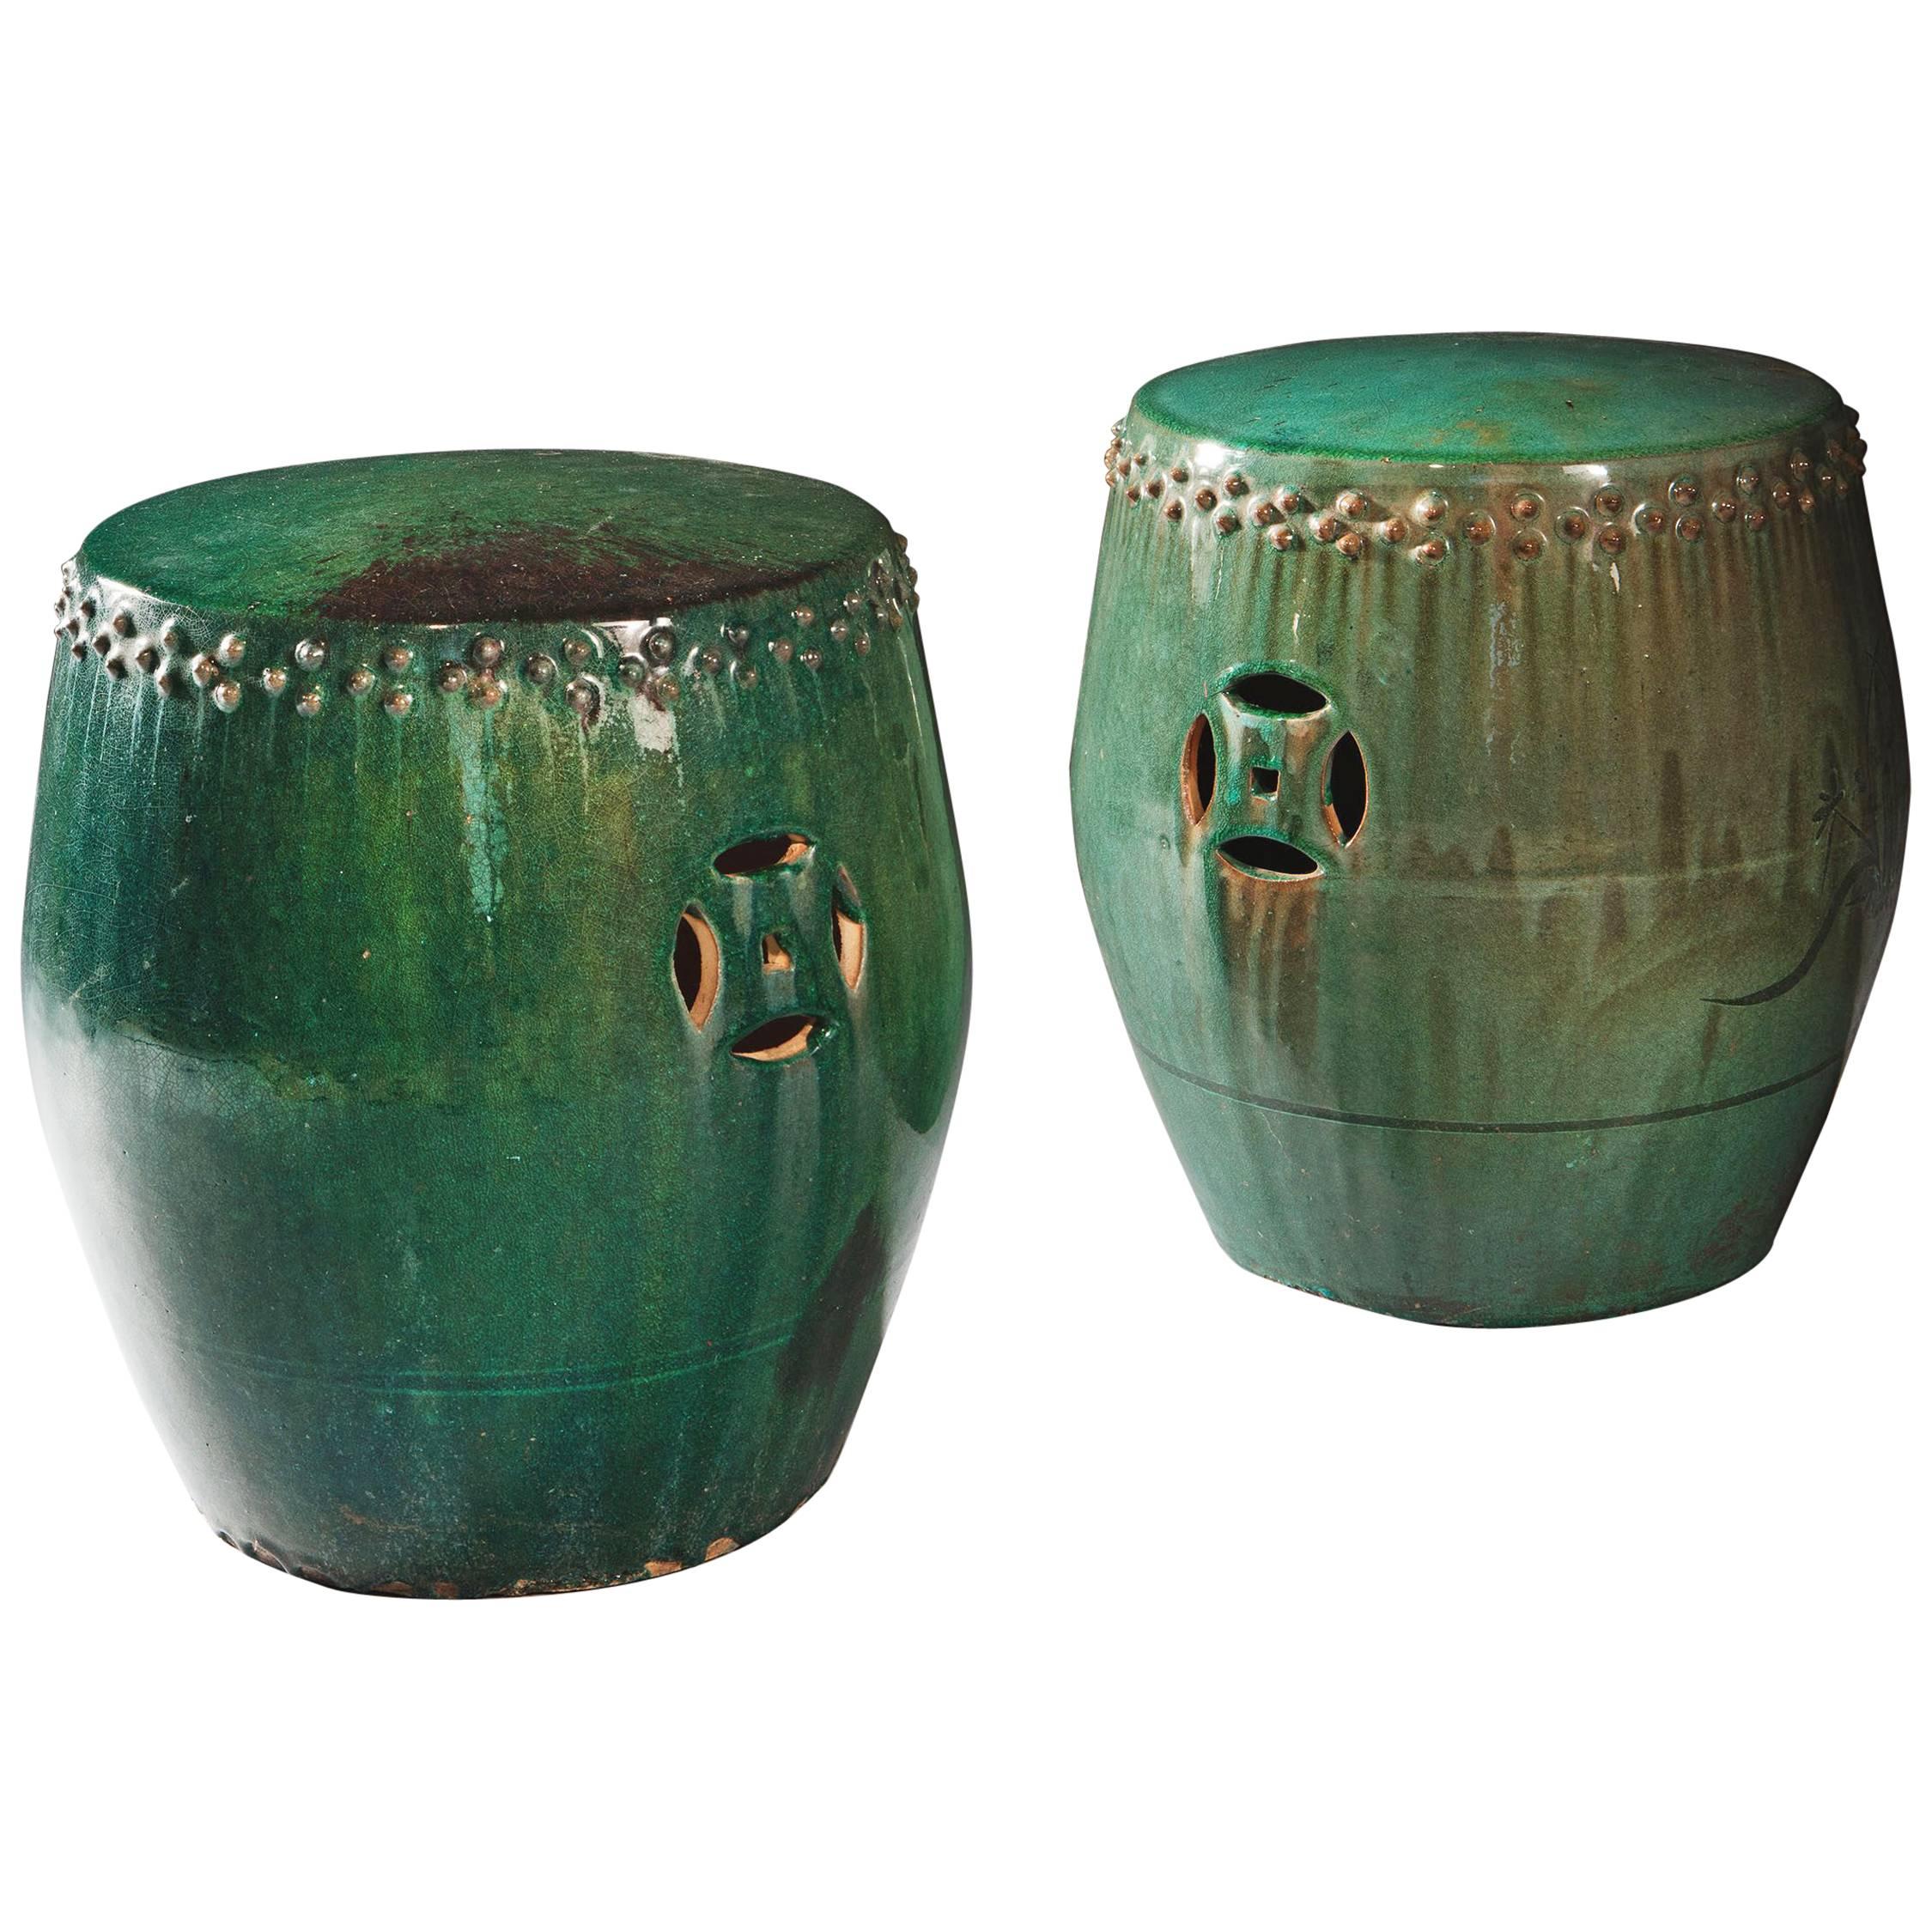 Pair of Vibrant Green Glazed Chinese Pottery Stools